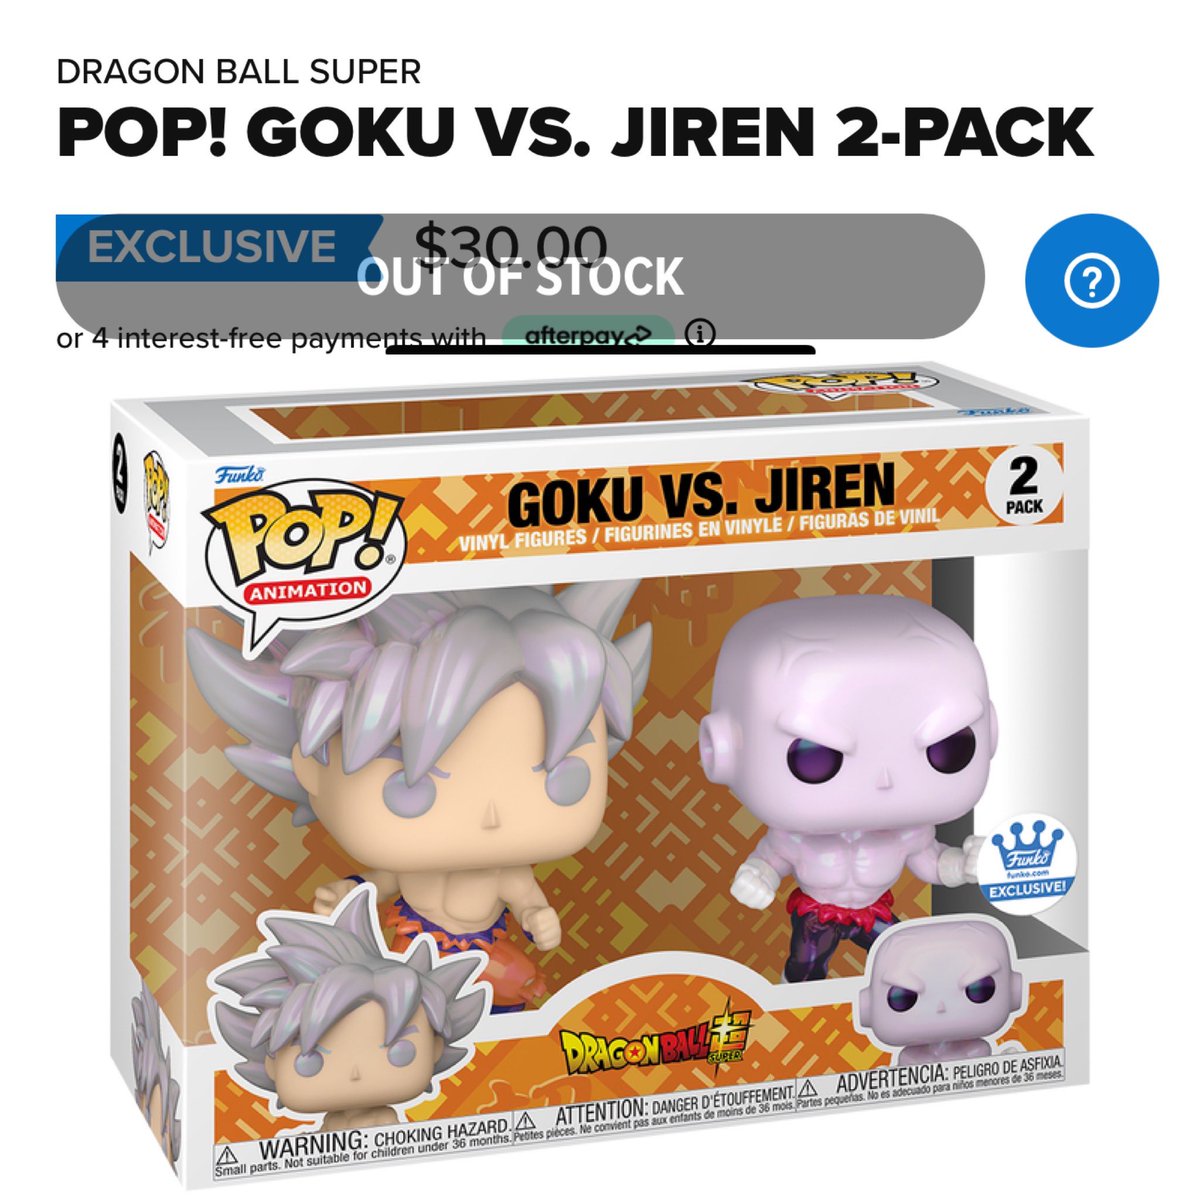 Goku vs Jiren 2-pack sold out in about a min. Not surprised given the 2k stock. Did you get one? . #Funko #FunkoPop #FunkoPopVinyl #Pop #PopVinyl #Collectibles #Collectible #FunkoCollector #FunkoPops #Collector #Toy #Toys #DisTrackers